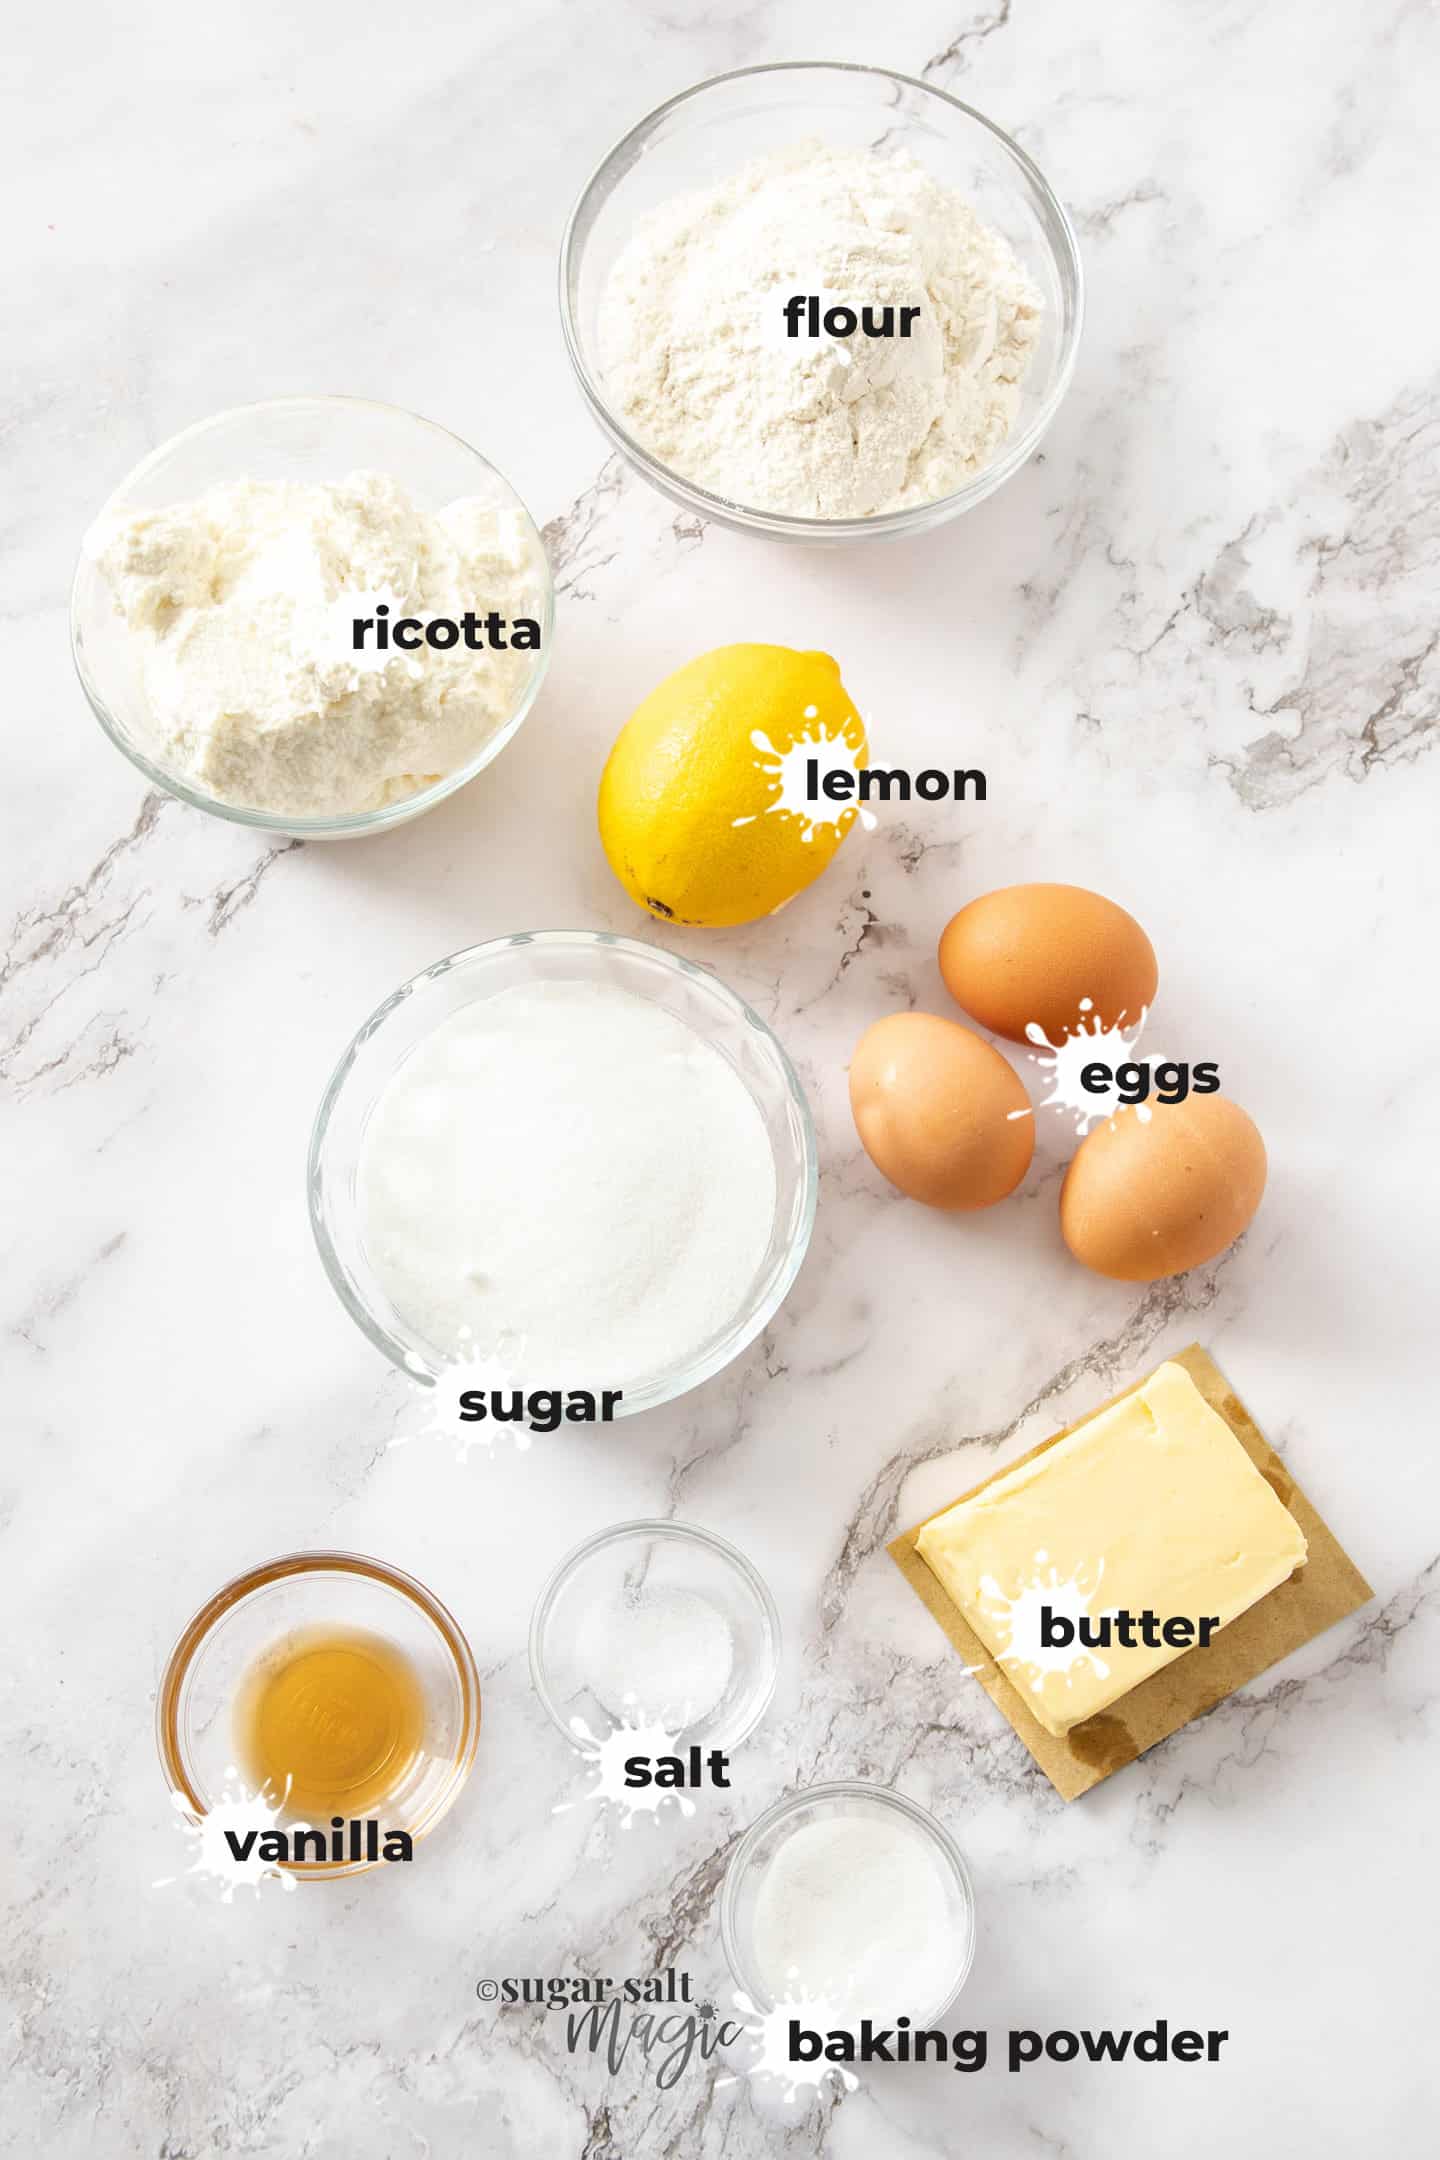 Ingredients for lemon ricotta cake on a white marble benchtop.